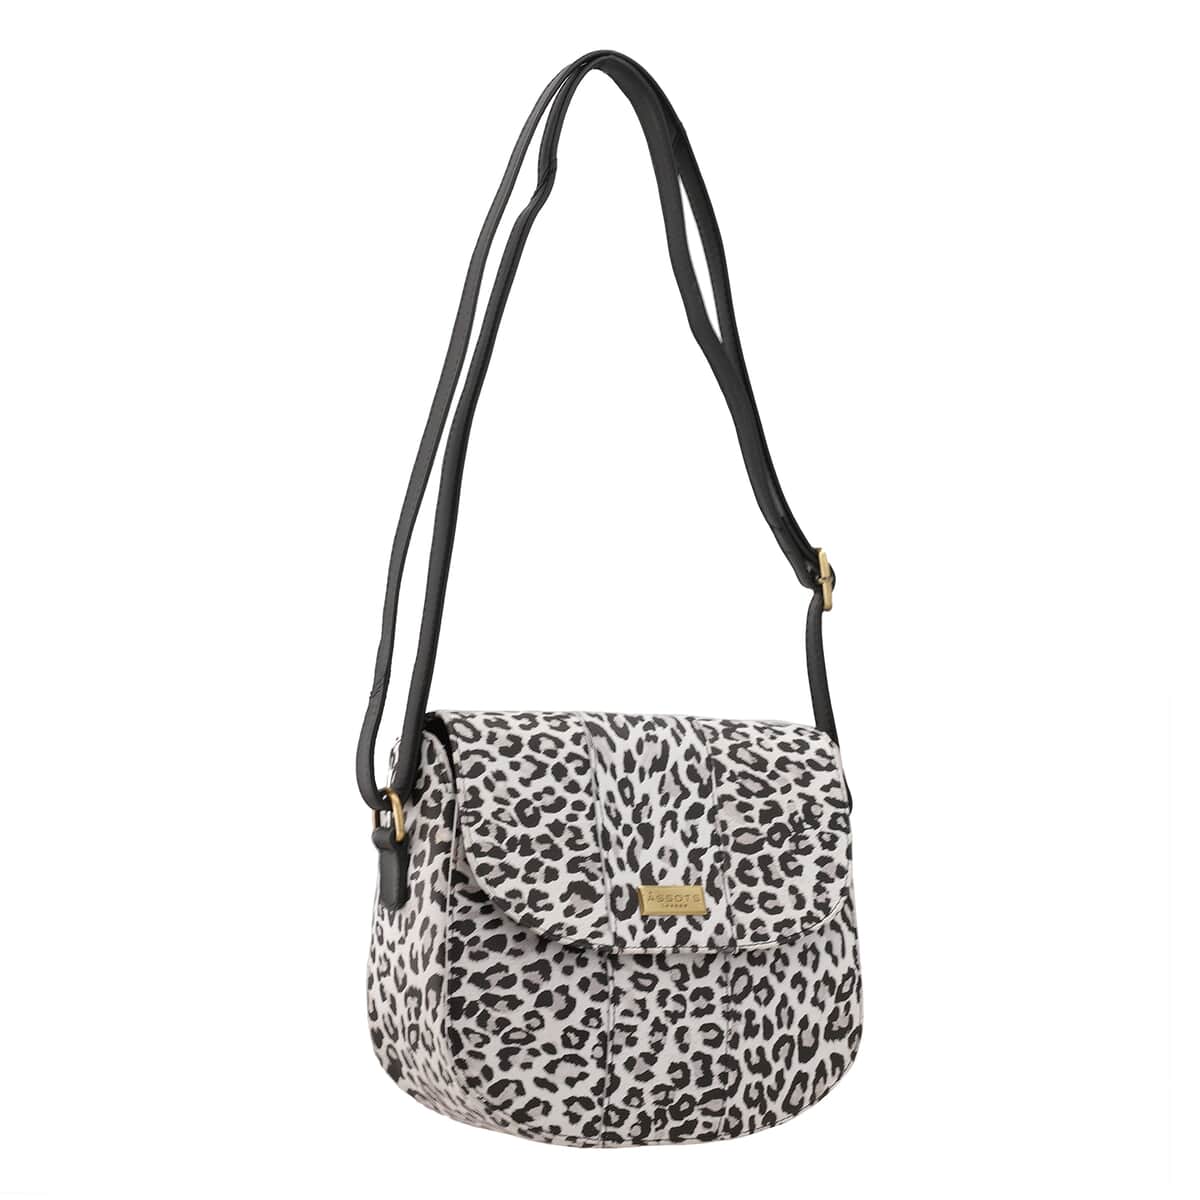 Assots London Black Leopard Print Genuine Leather Crossbody Sling Bag For Ladies With Adjustable Strap and Button Closure (8.66X8.07X3.13) image number 4